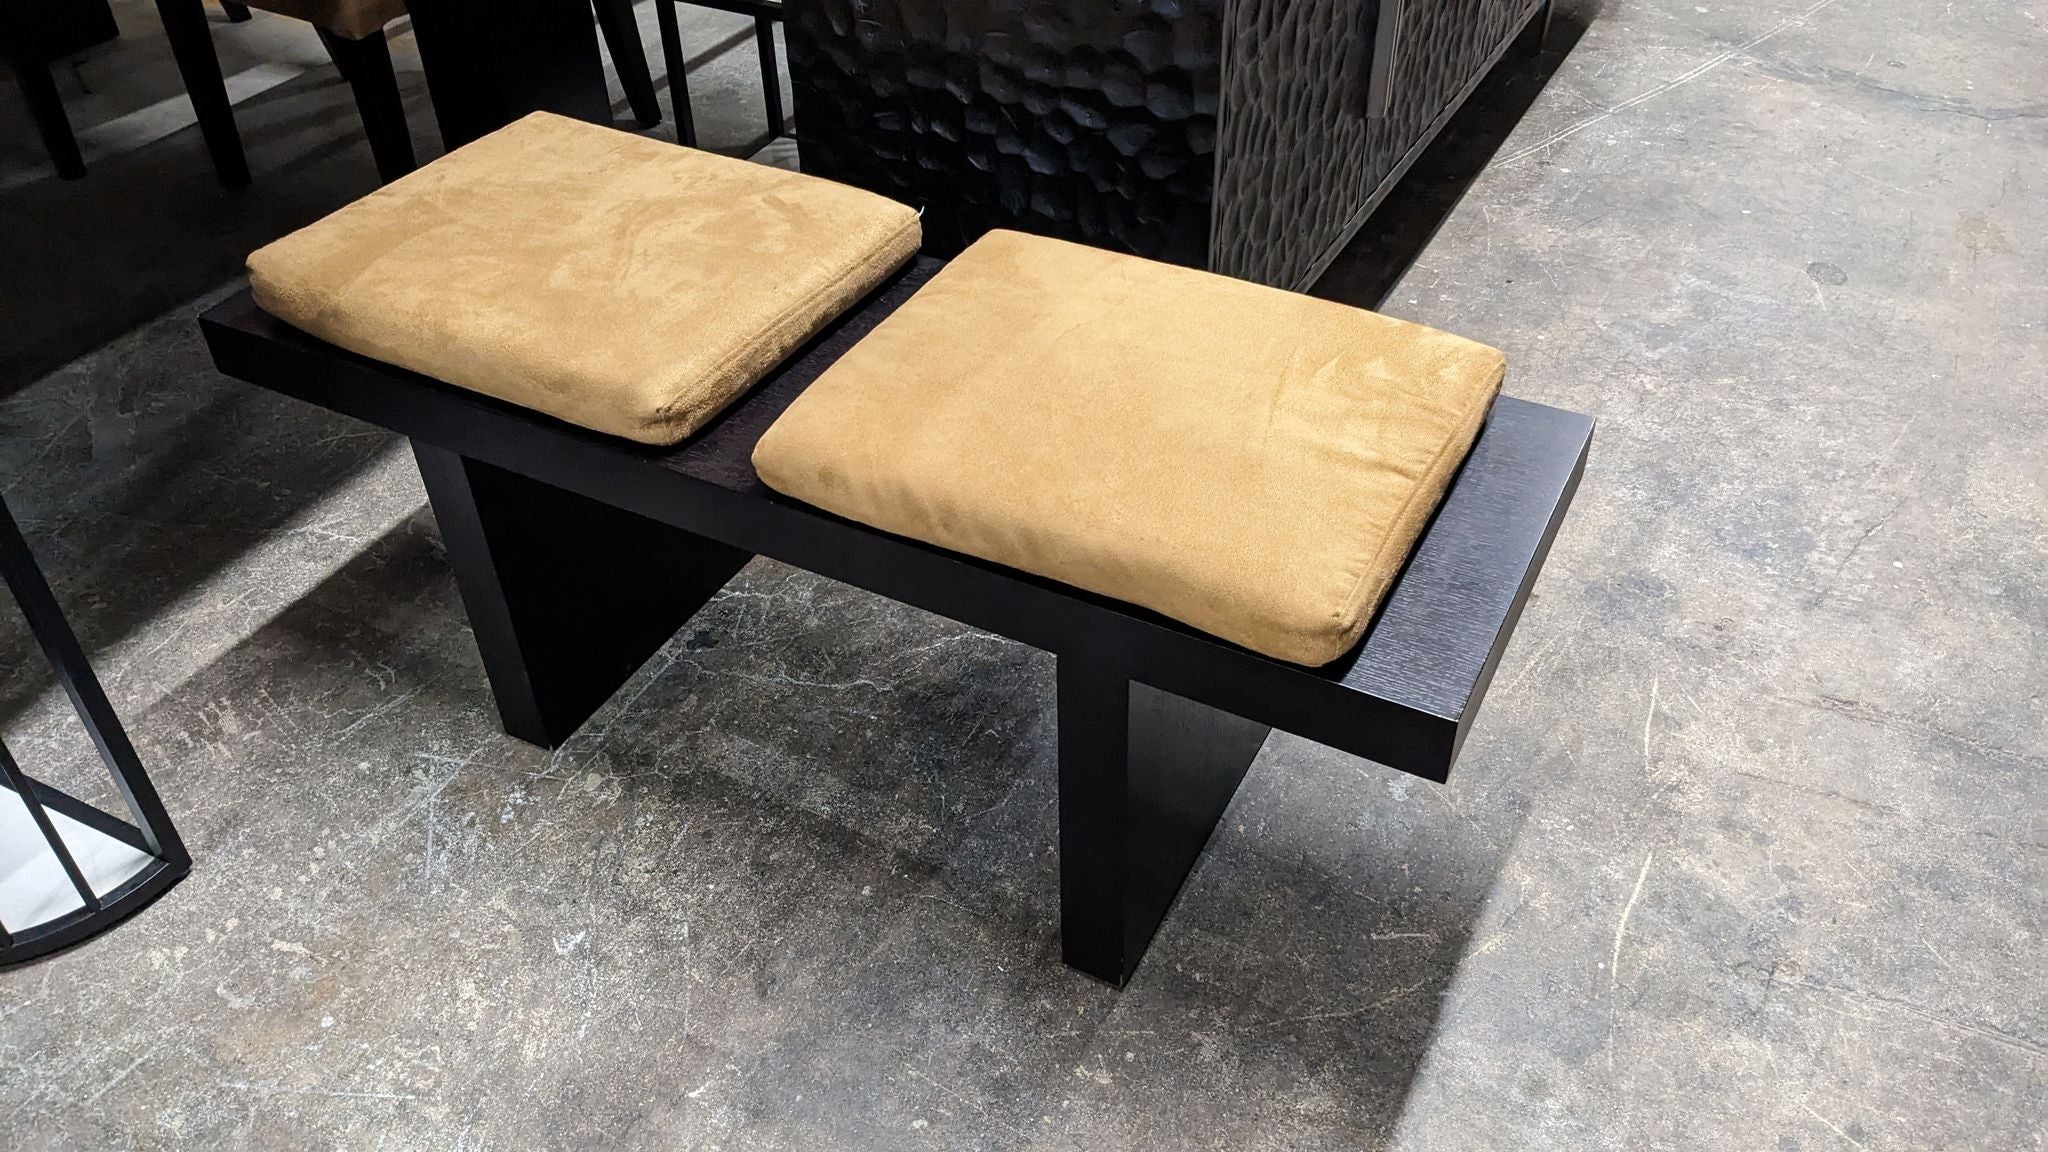 Reperch brand modern bench with two tan cushions on a black base displayed on a concrete floor.